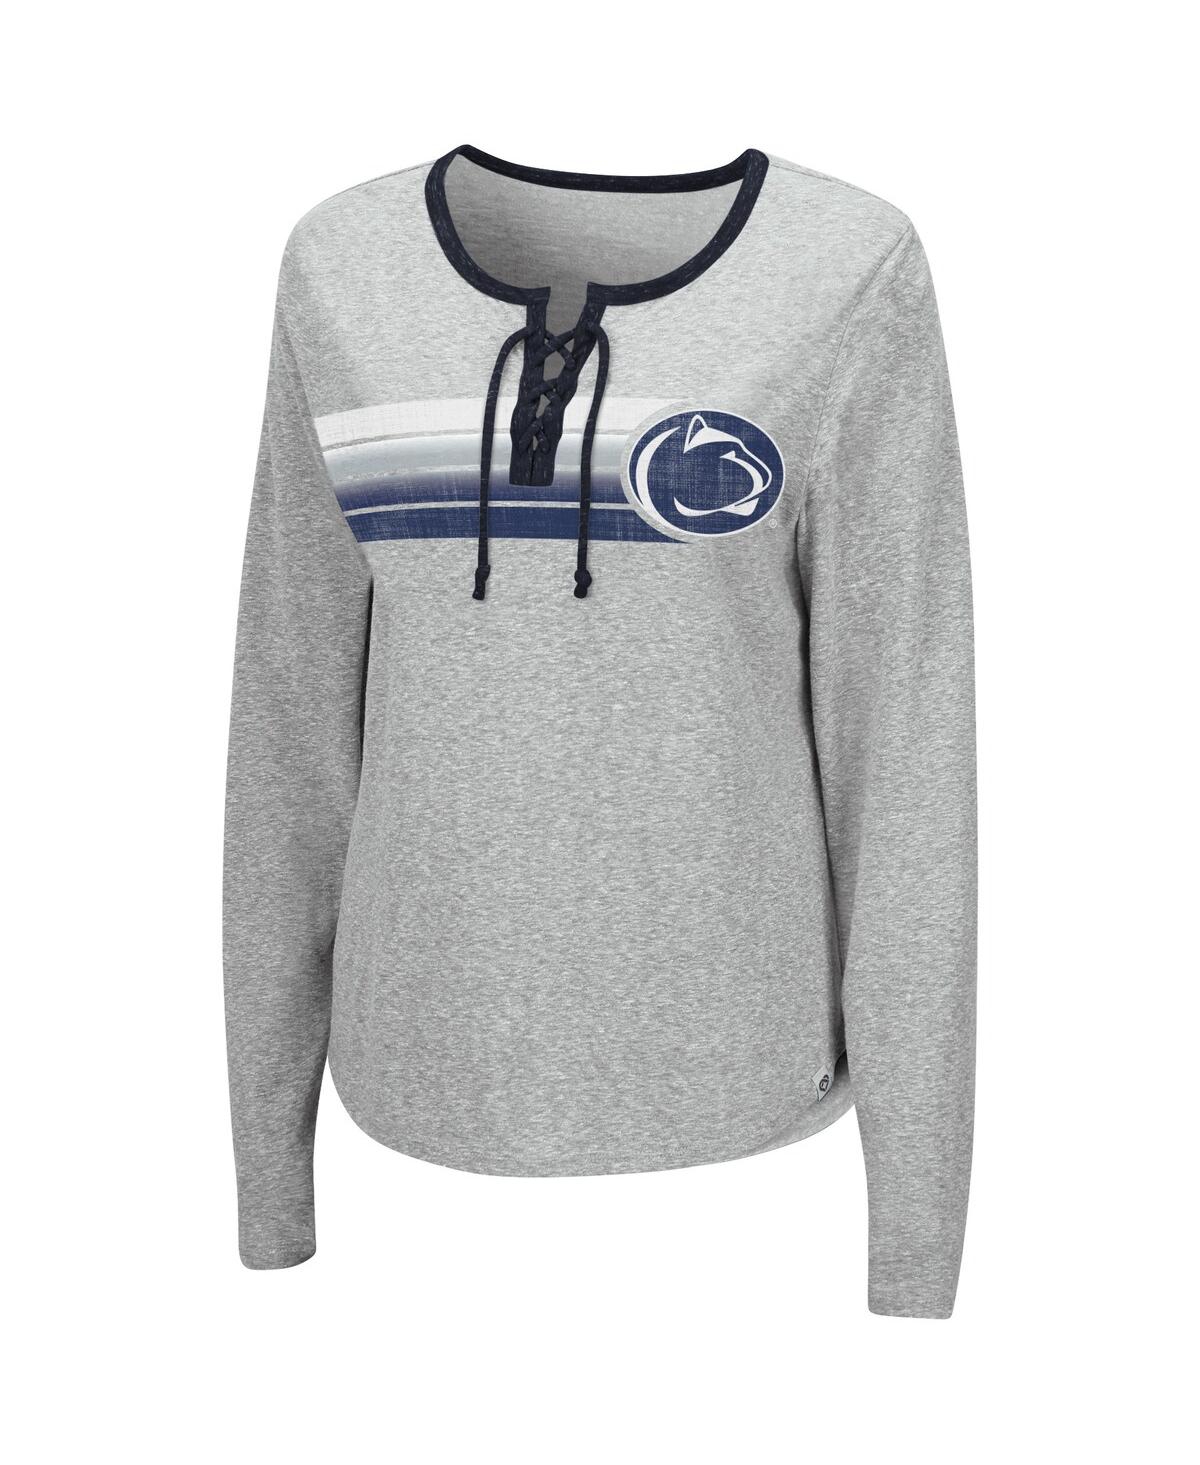 Shop Colosseum Women's  Heathered Gray Penn State Nittany Lions Sundial Tri-blend Long Sleeve Lace-up T-sh